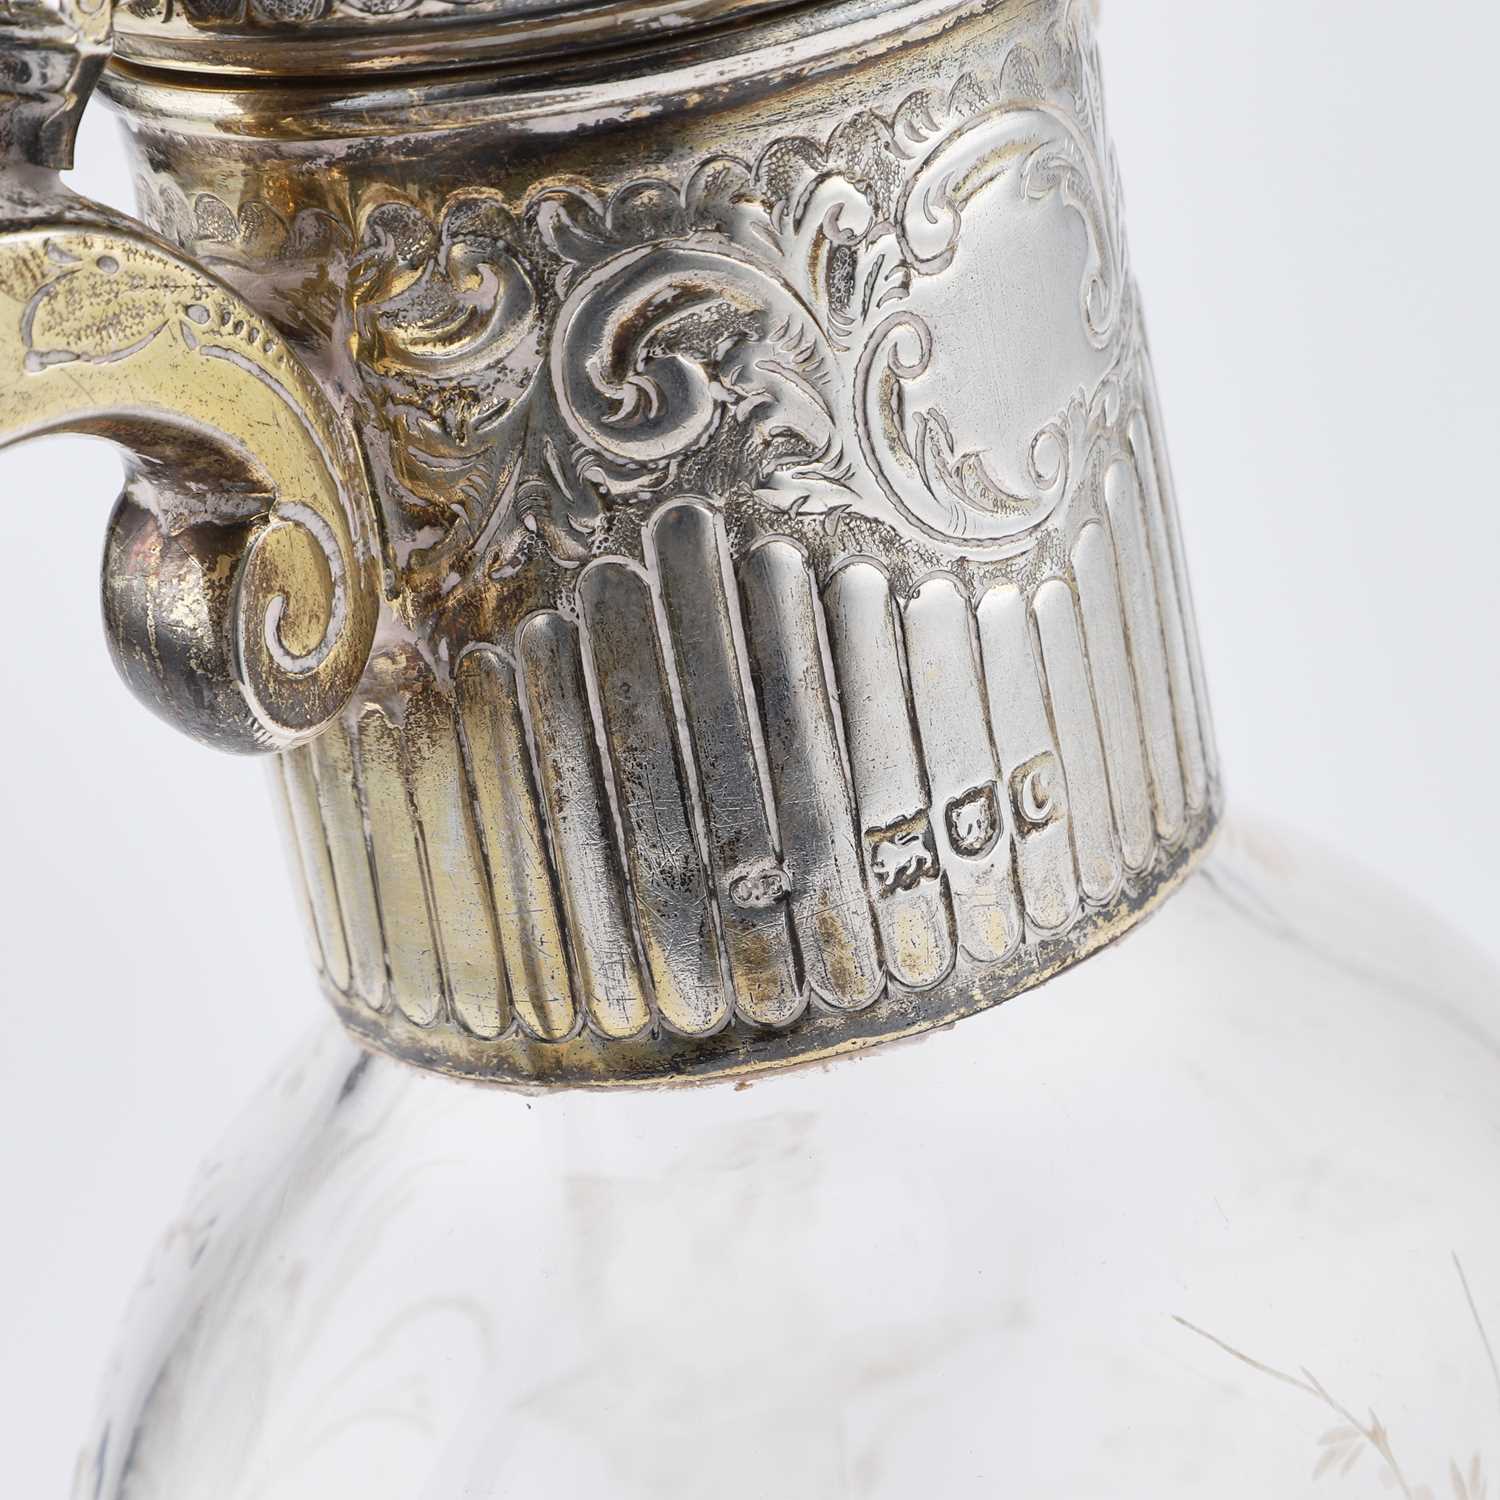 A VICTORIAN SILVER-MOUNTED 'ROCK CRYSTAL' CLARET JUG - Image 2 of 2